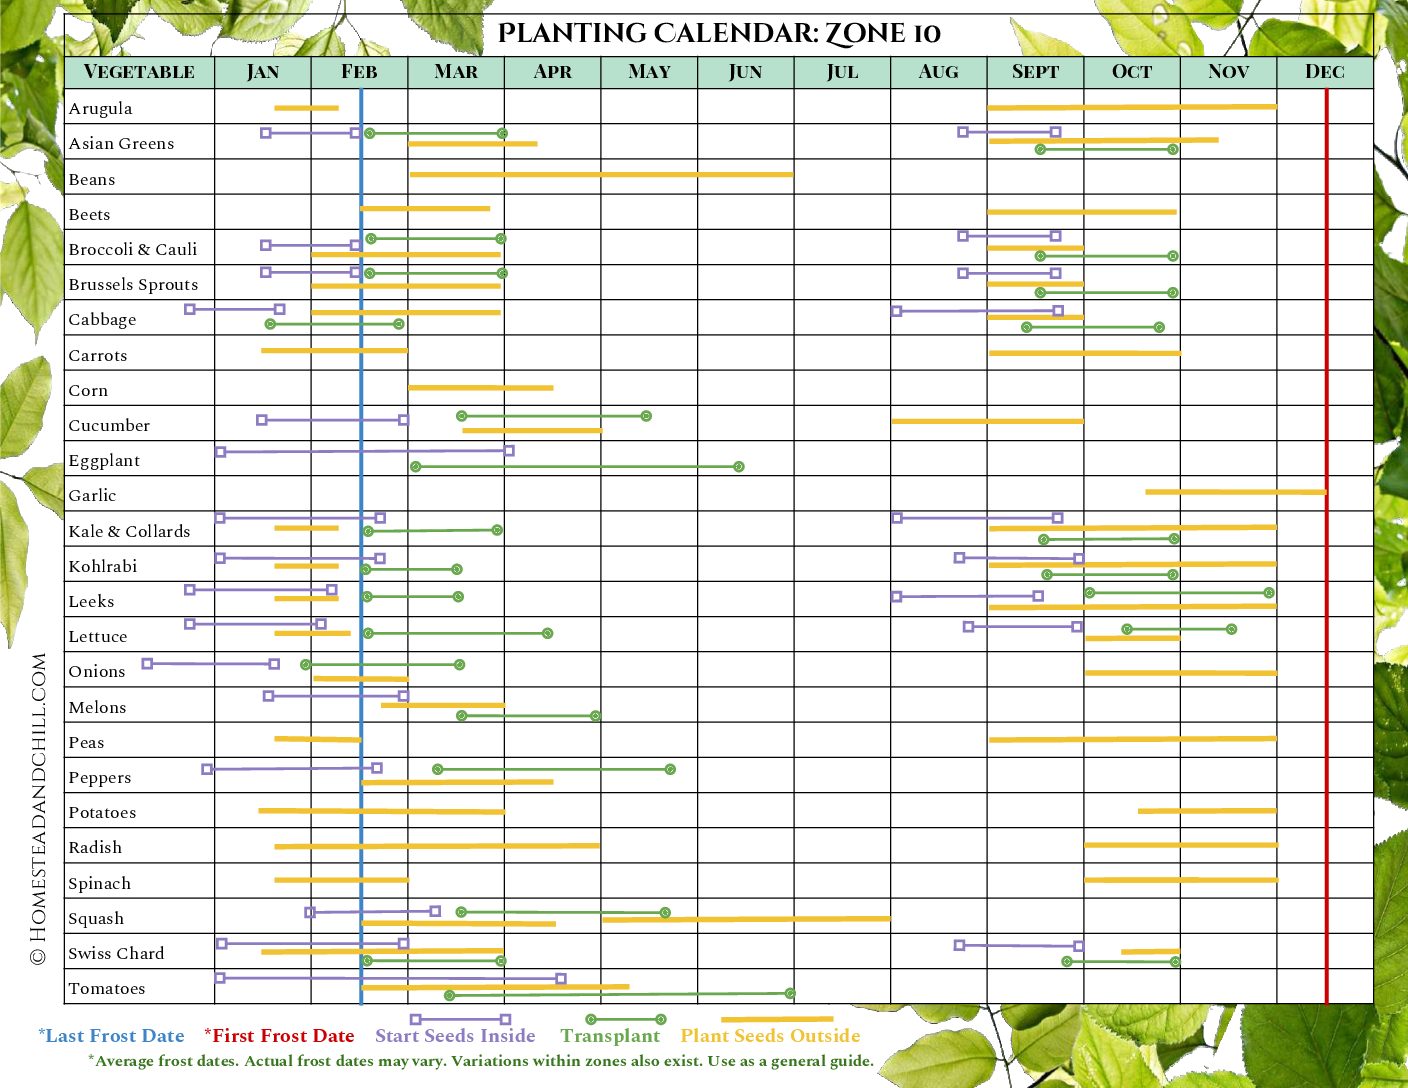 A garden planting calendar for USDA growing zone 10. This shows gardeners the best time to start seeds indoors, transplant, or directly plant their vegetable seeds in the garden, depending on where they live.